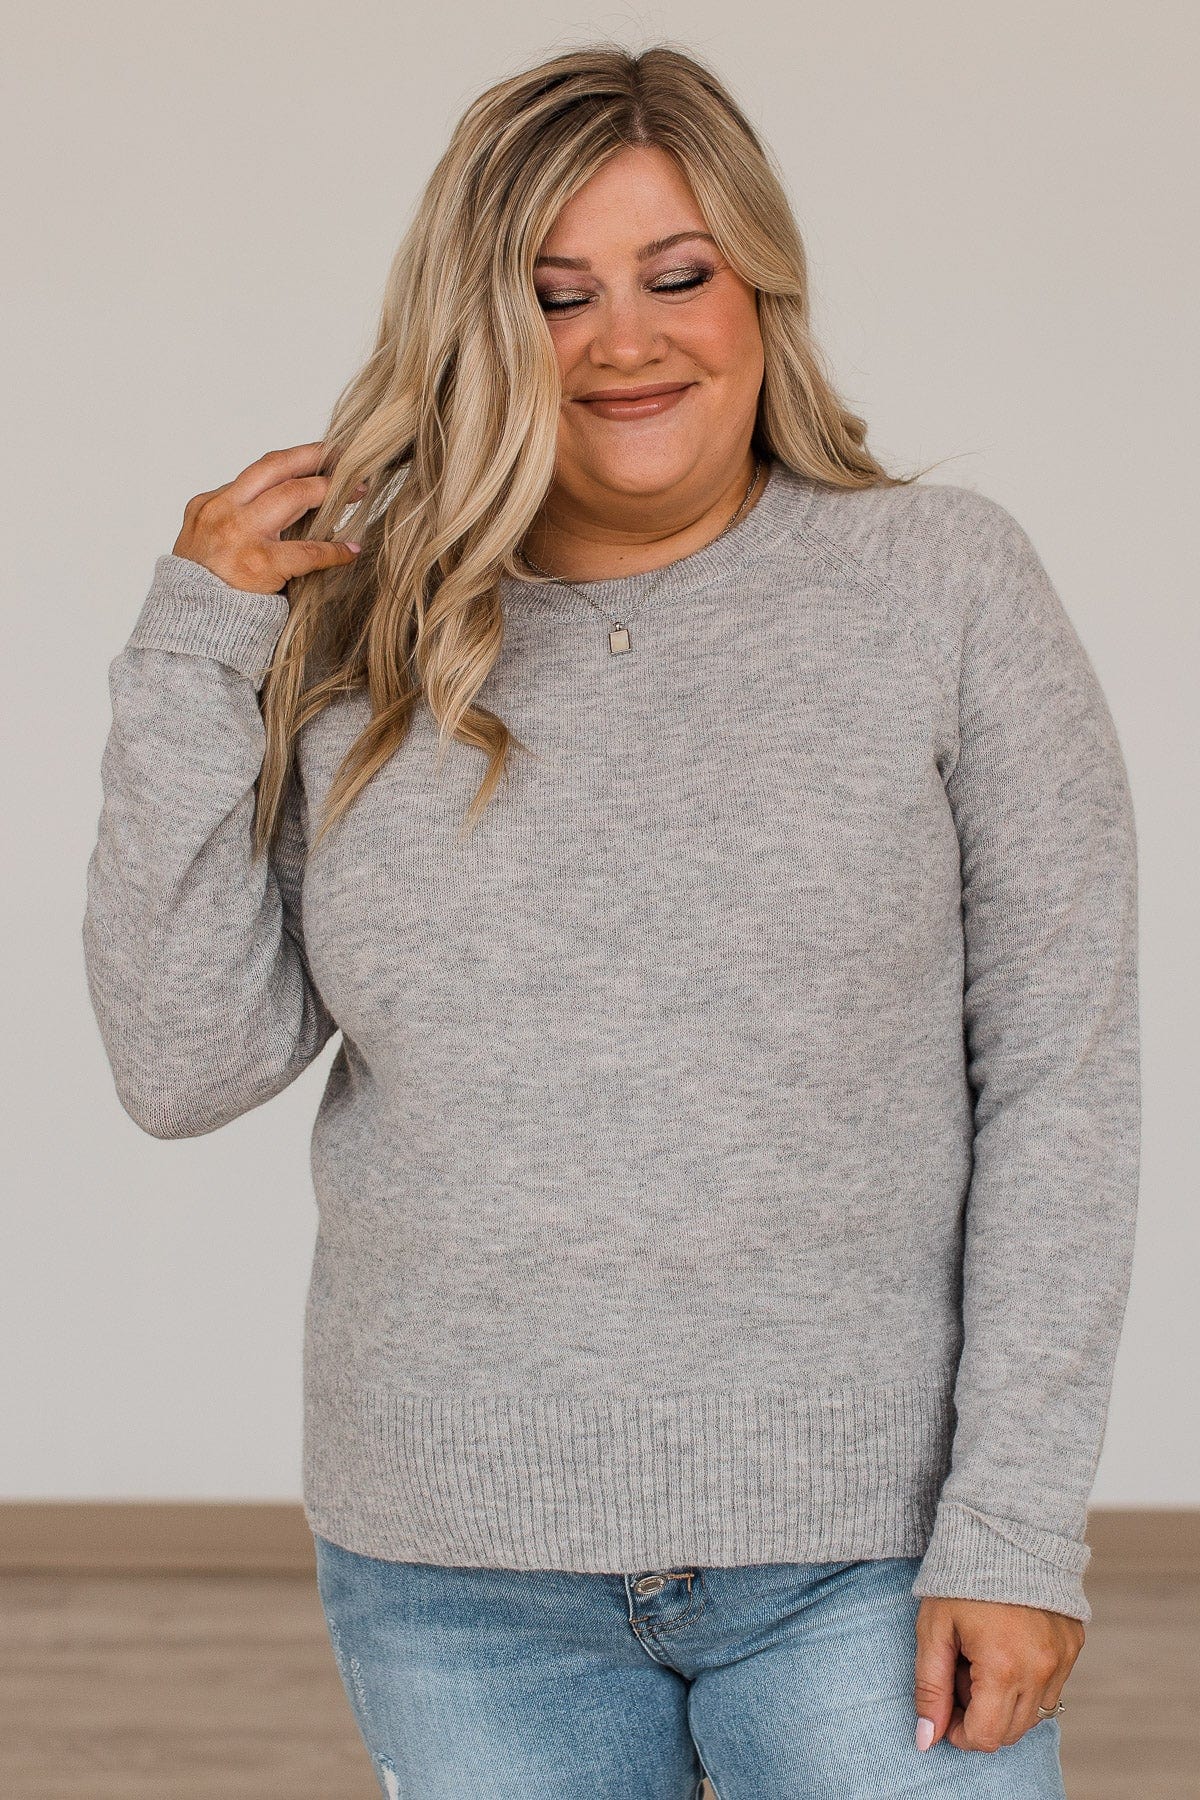 No Regrets Brushed Knit Sweater- Heather Grey